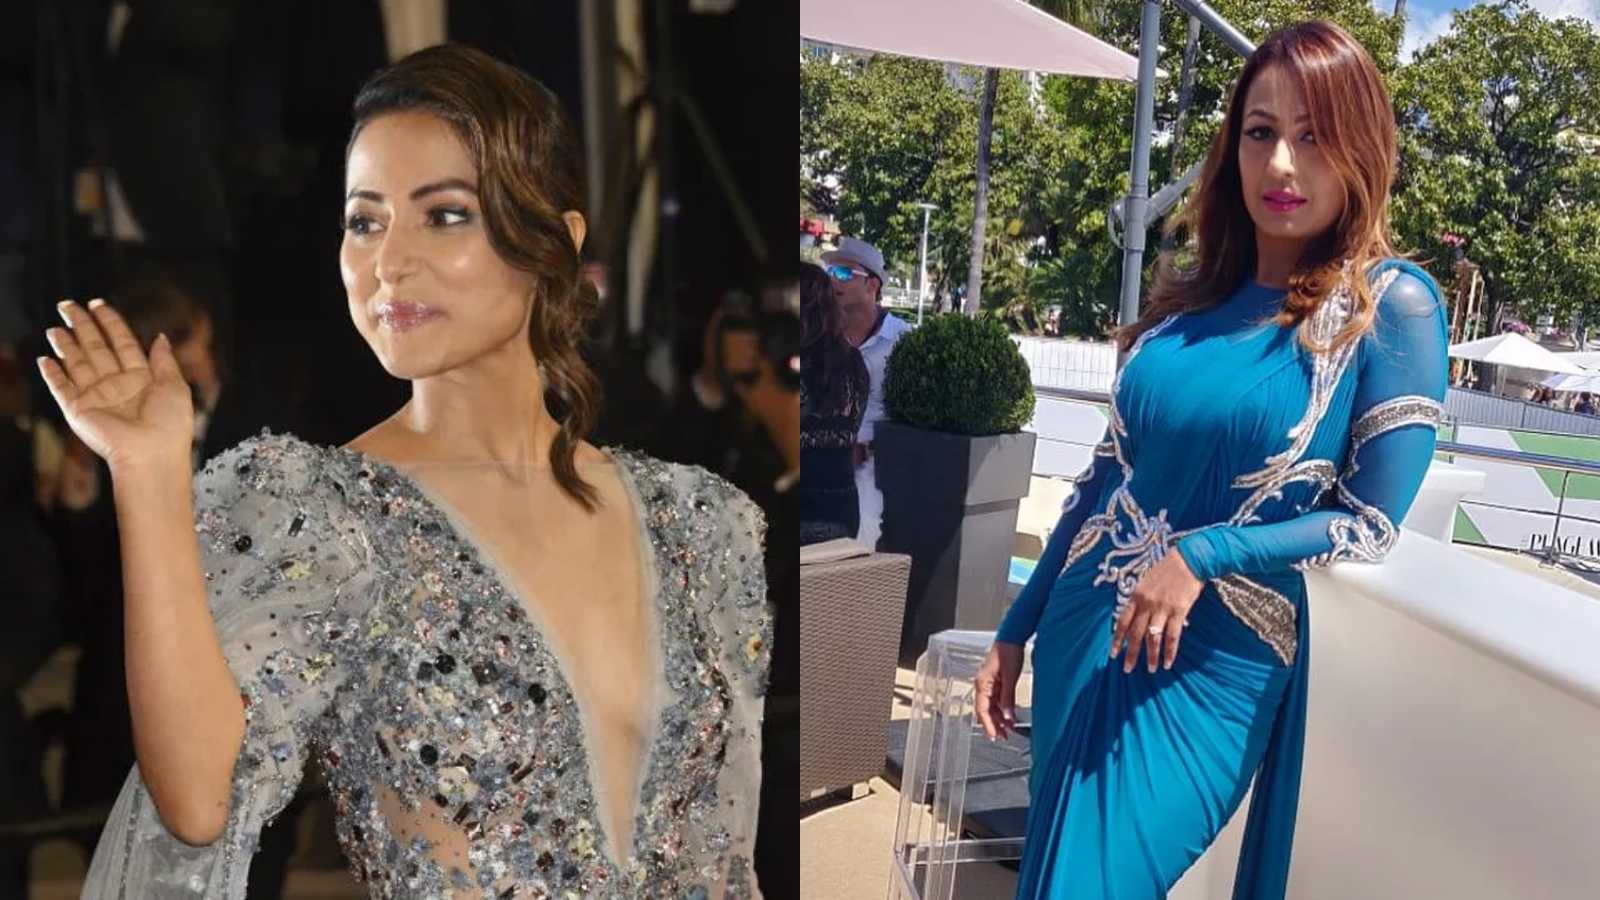 Cannes Film Festival 2022: TV celebrities who have dazzled at the prestigious event in years past